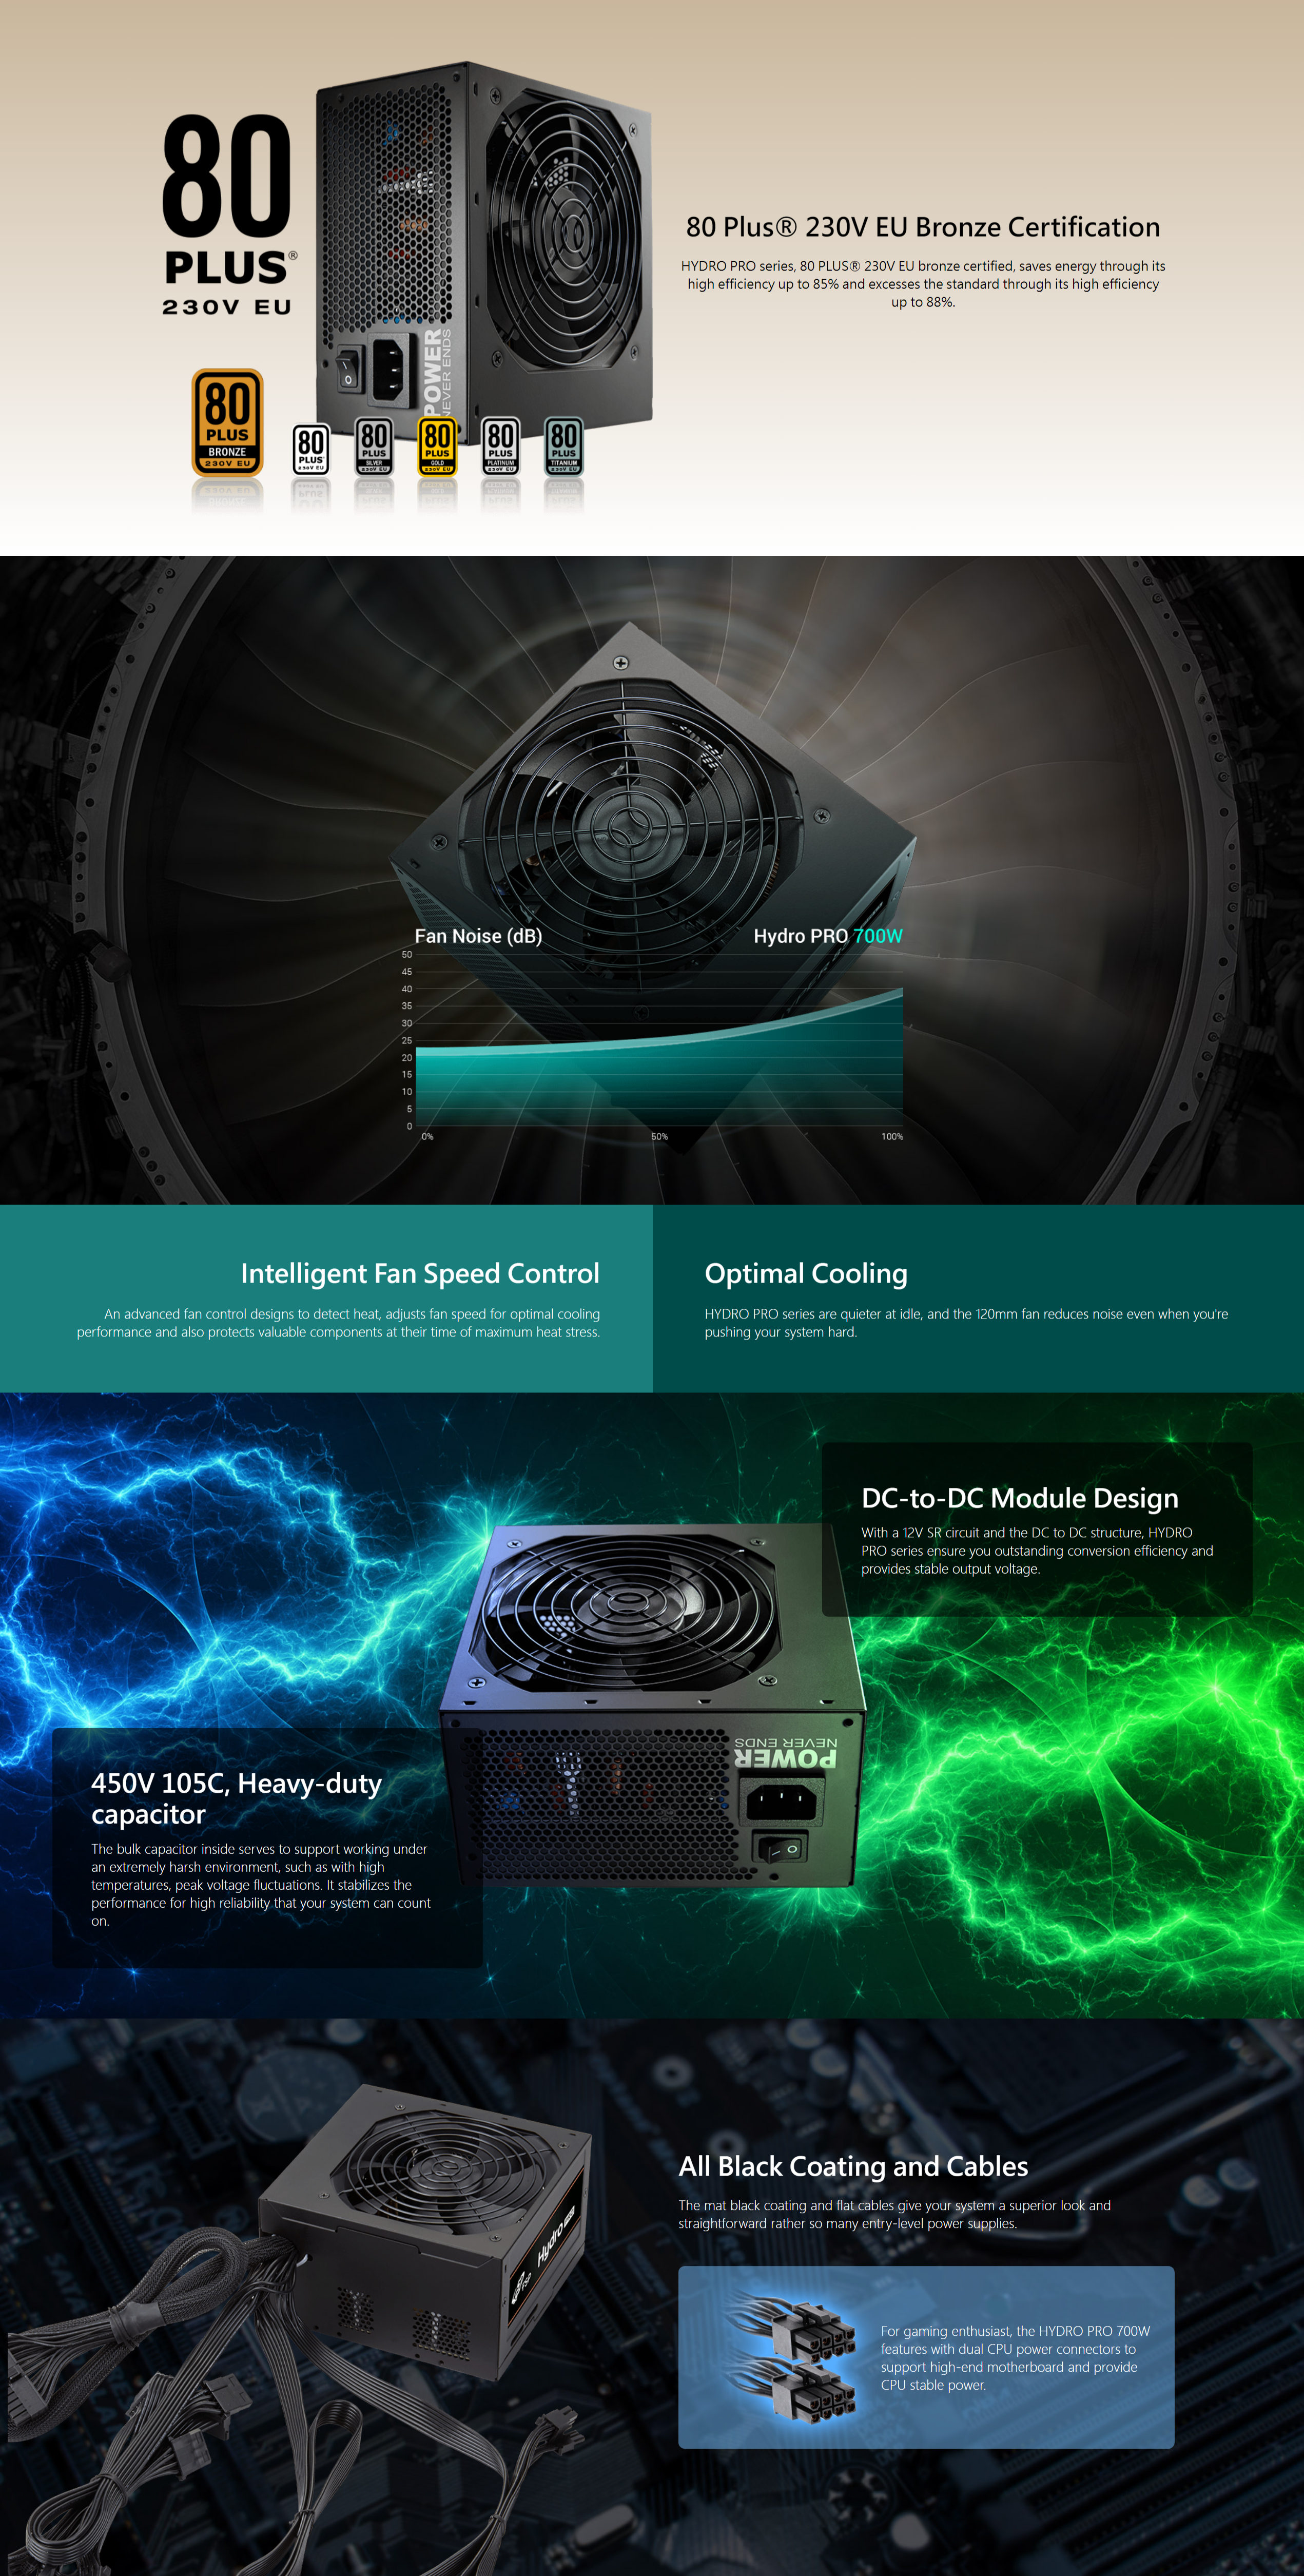 A large marketing image providing additional information about the product FSP Hydro PRO 700W Bronze ATX PSU - Additional alt info not provided